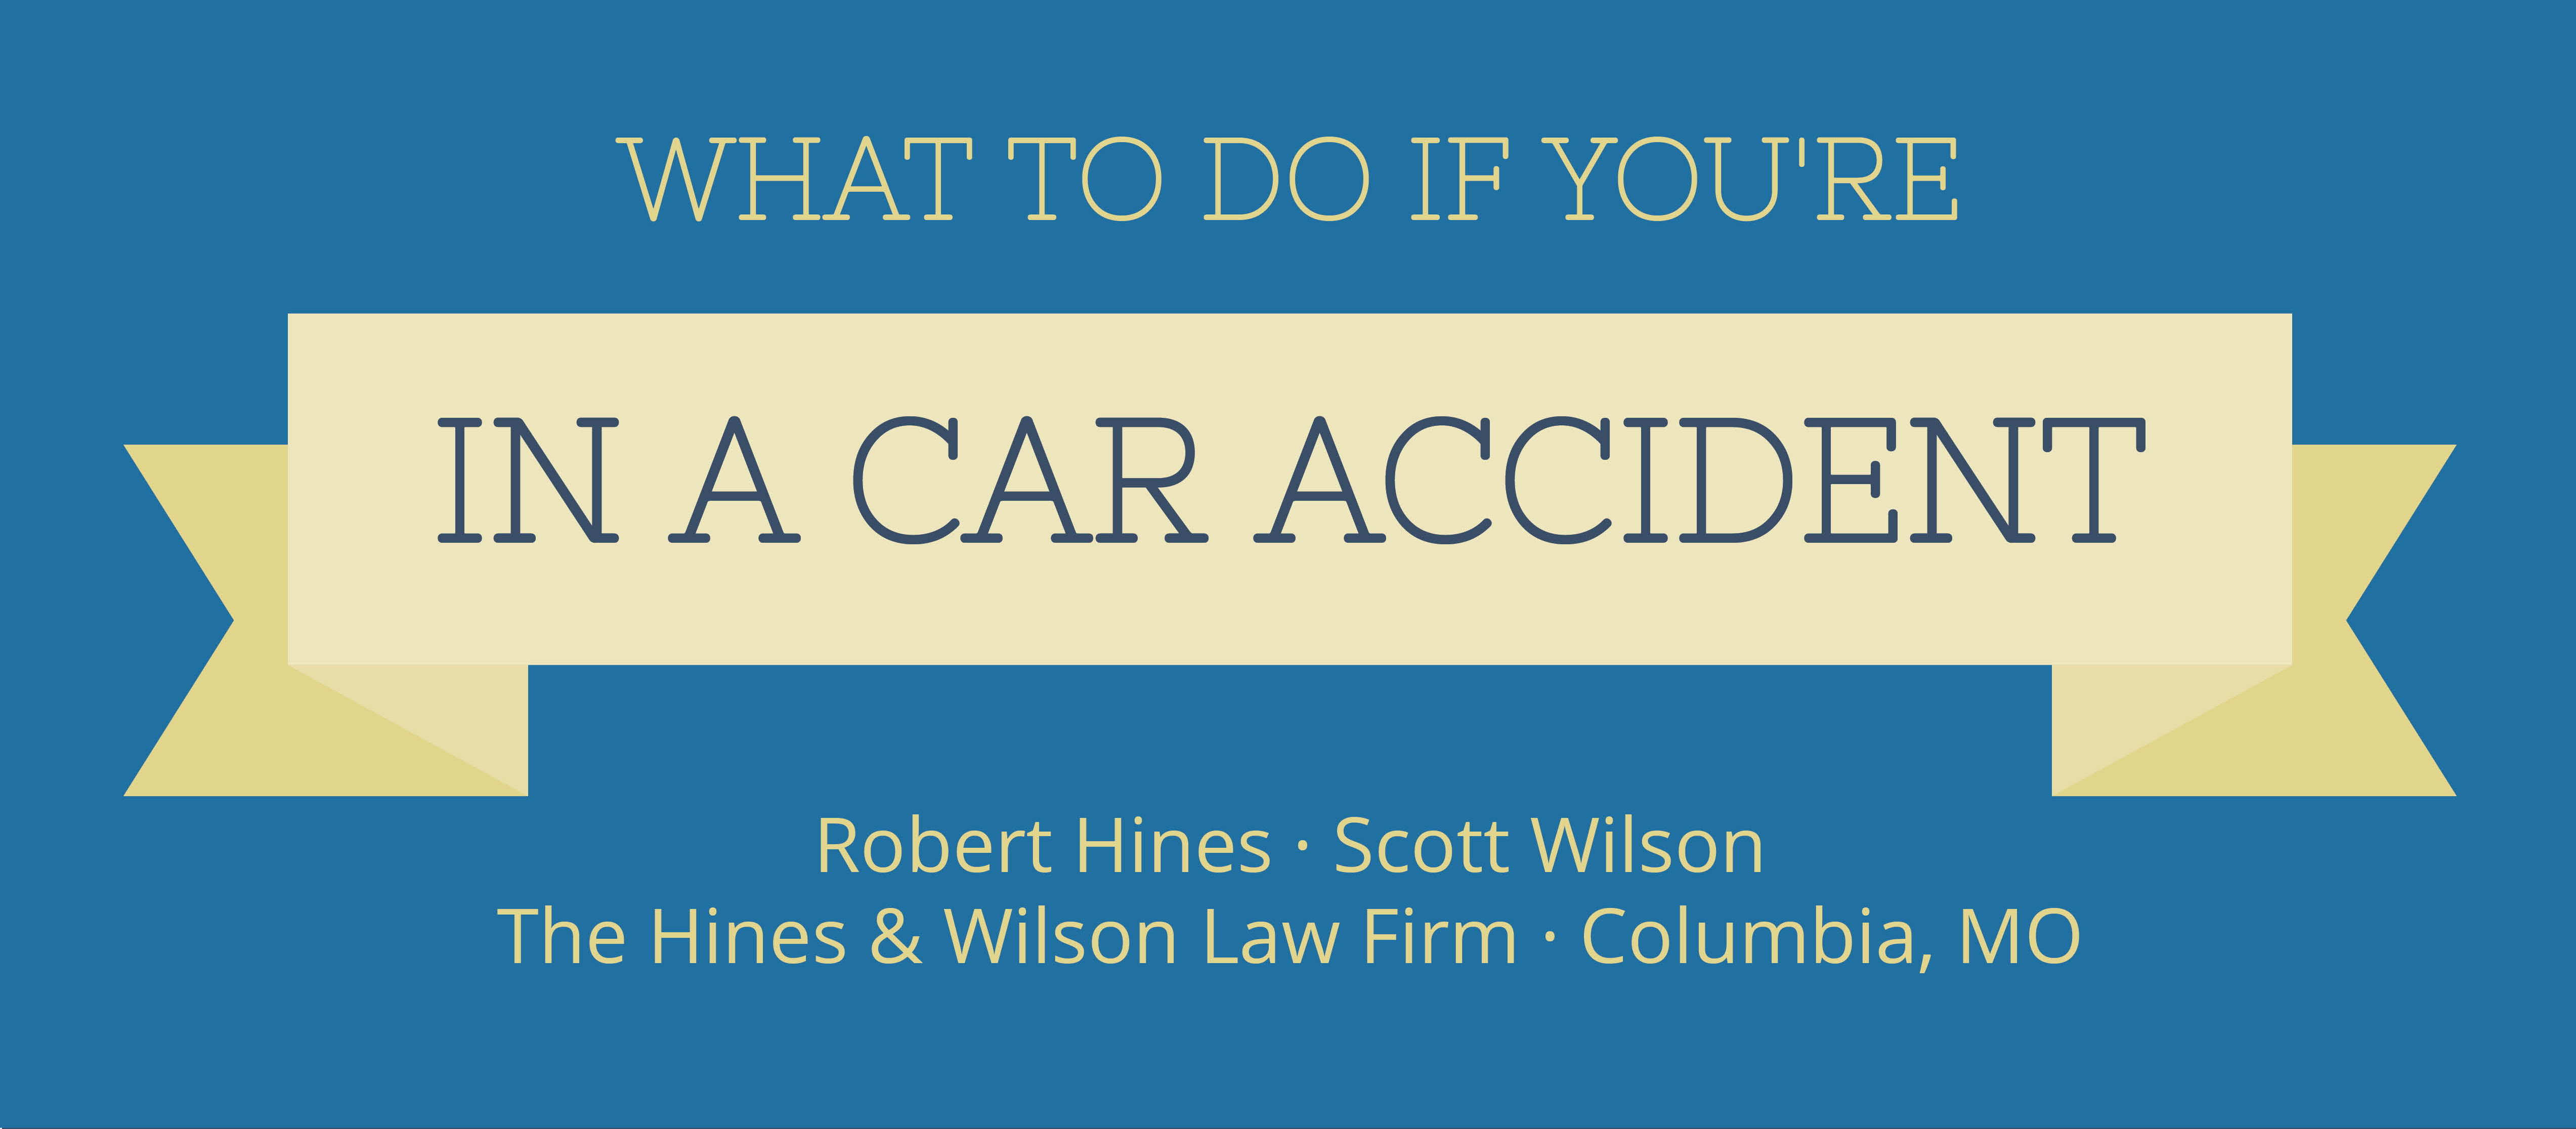 what to do if you're in a car accident infographic header